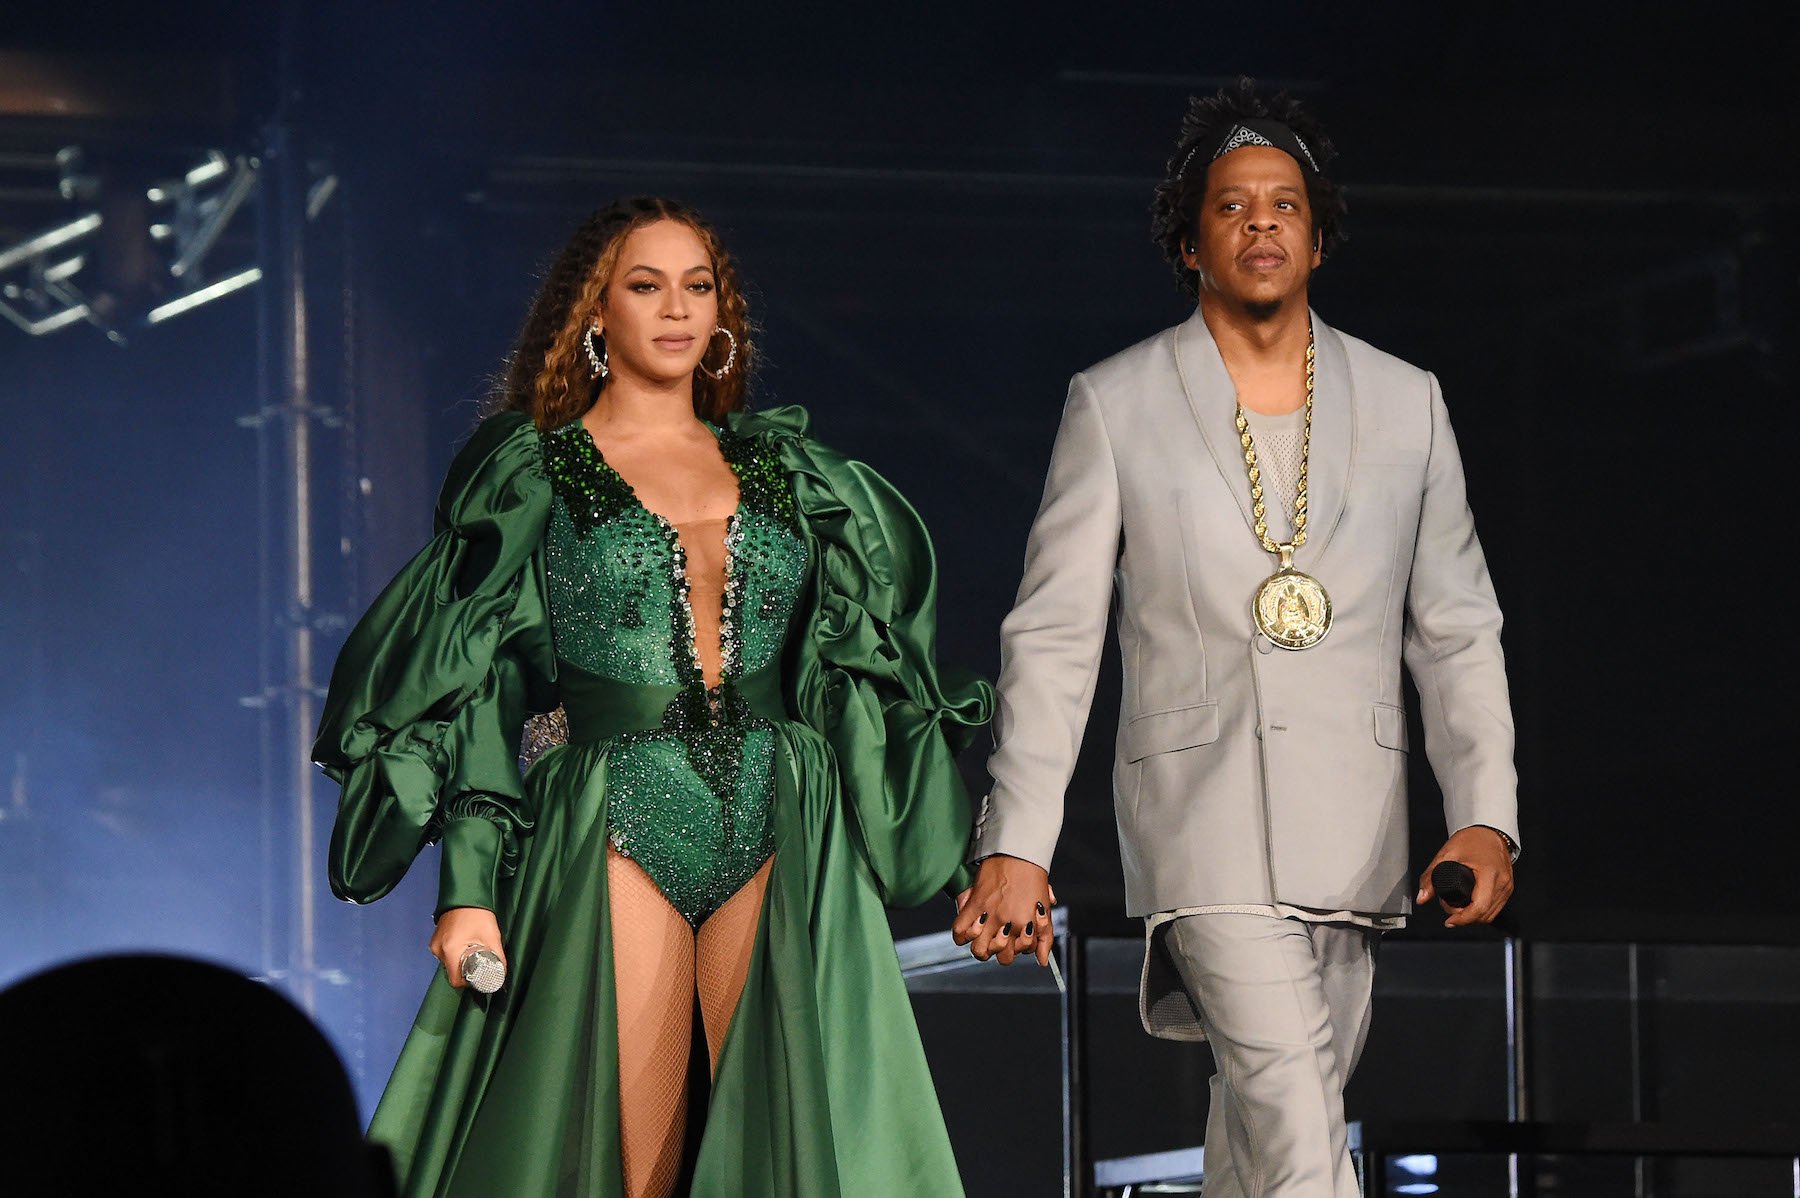 Beyoncé and Jay-Z Are Tied For the Most Nominations in Grammys History